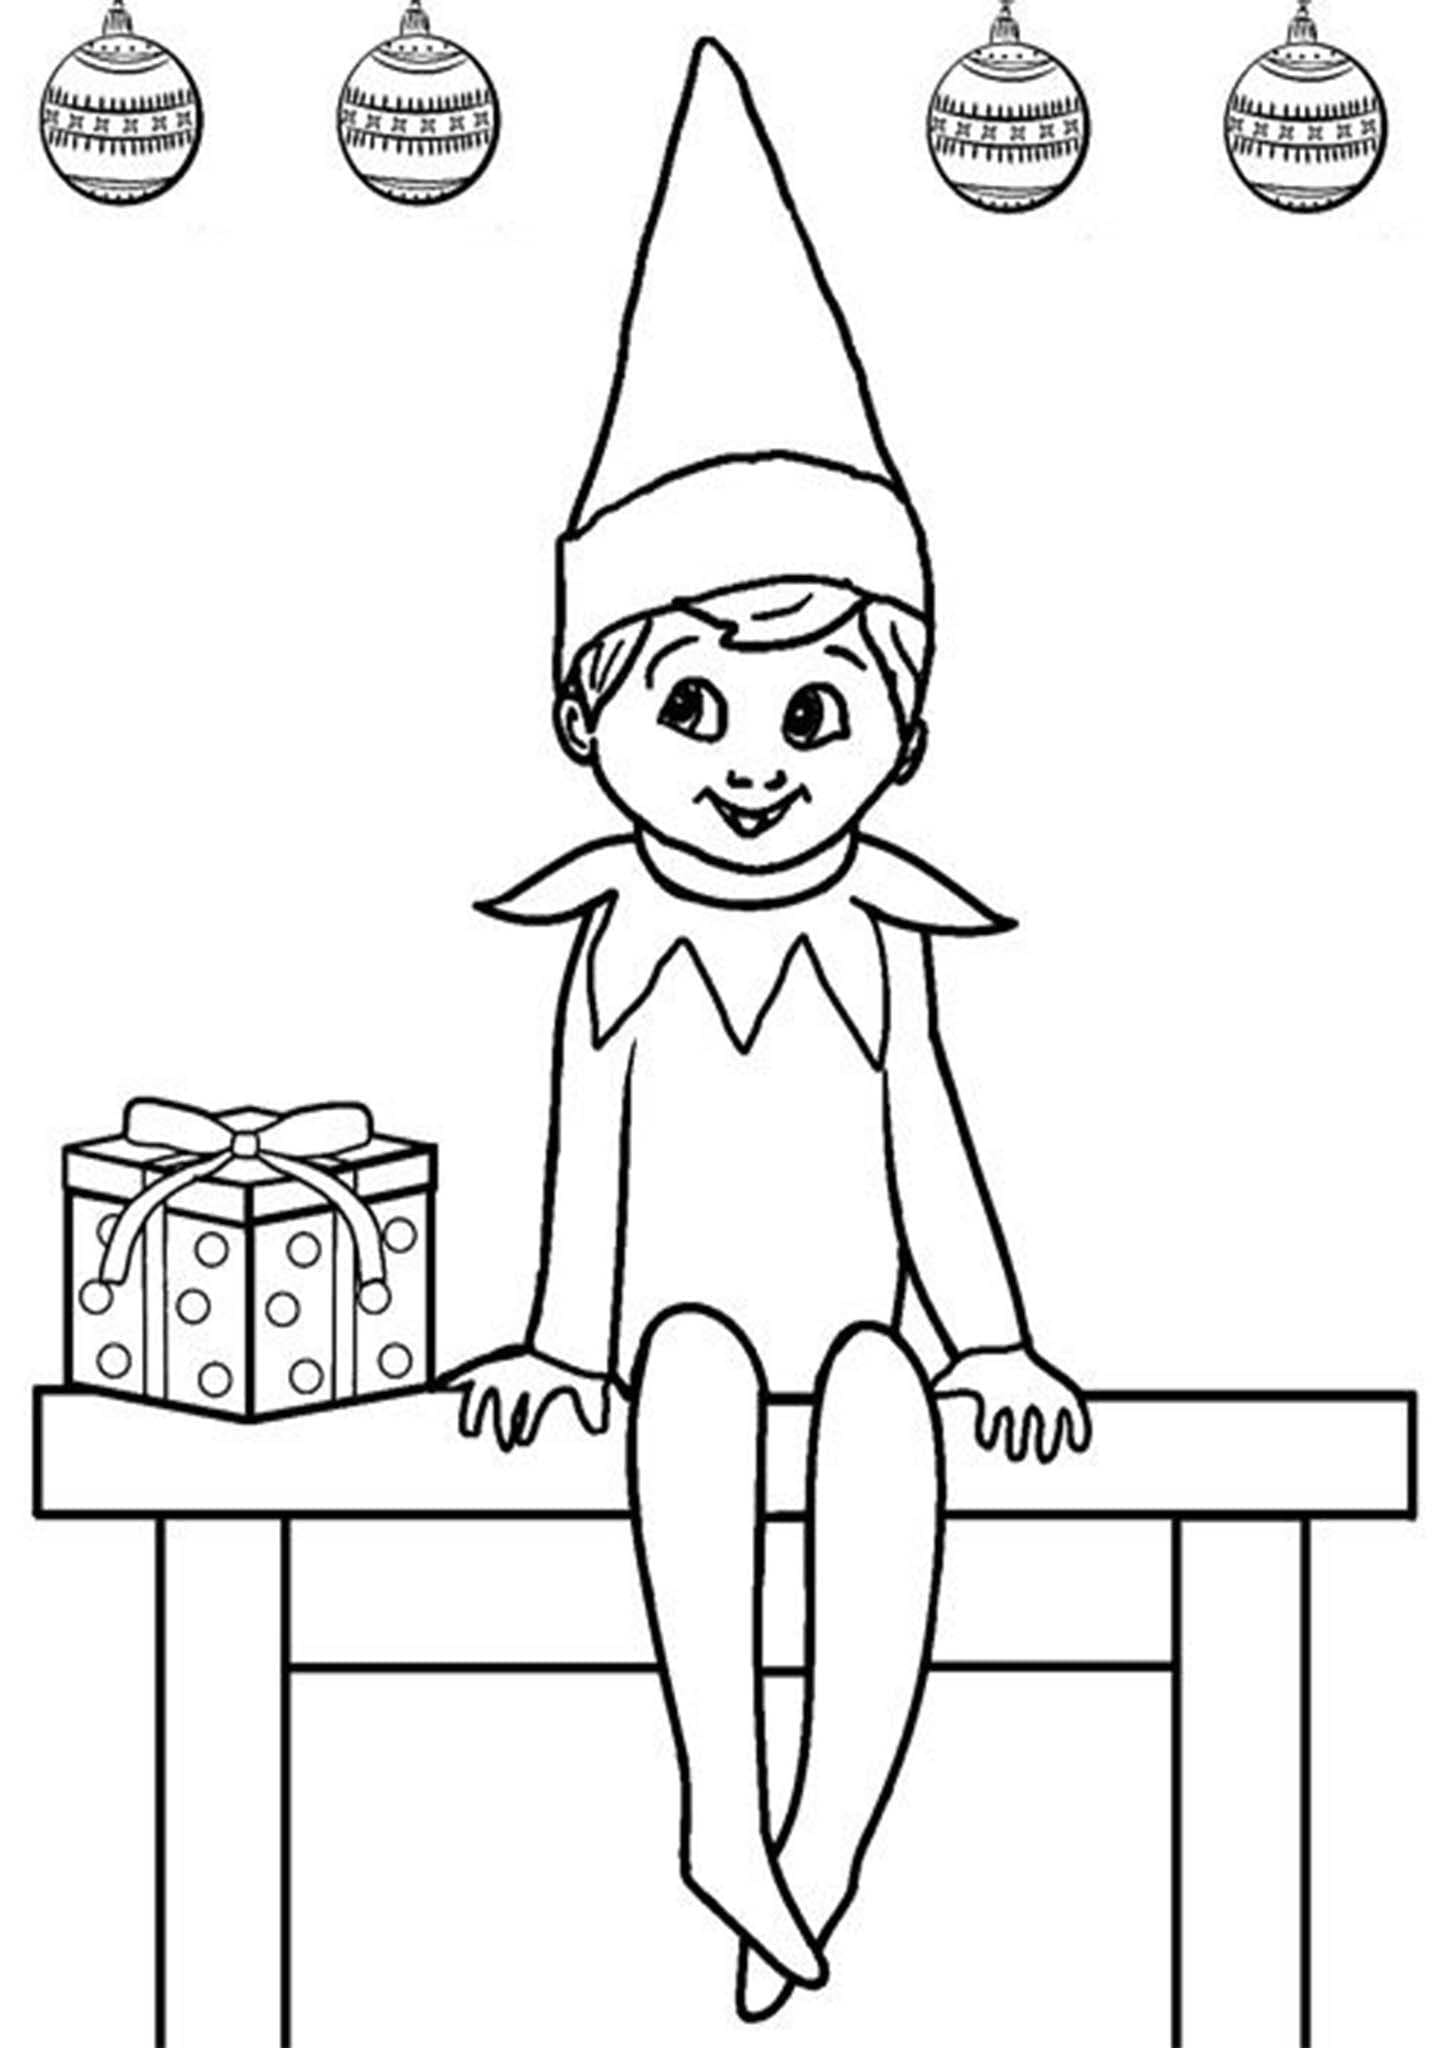 Very Cute Elf On The Shelf Coloring Page - Download, Print Or Color 